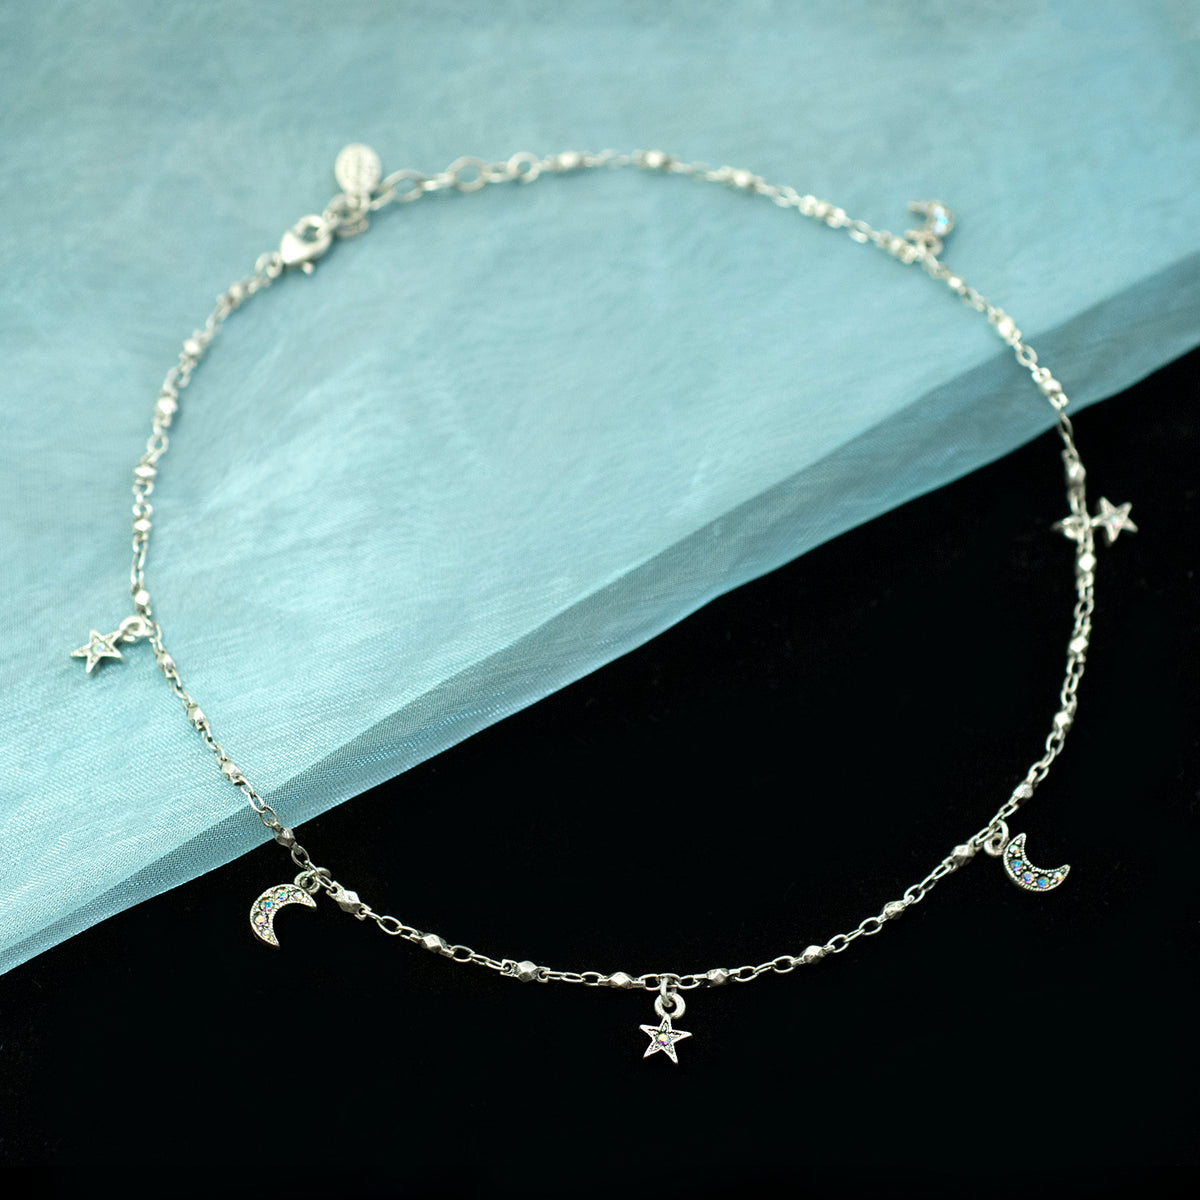 Star & Moon Charm Necklace N1629 - sweetromanceonlinejewelry